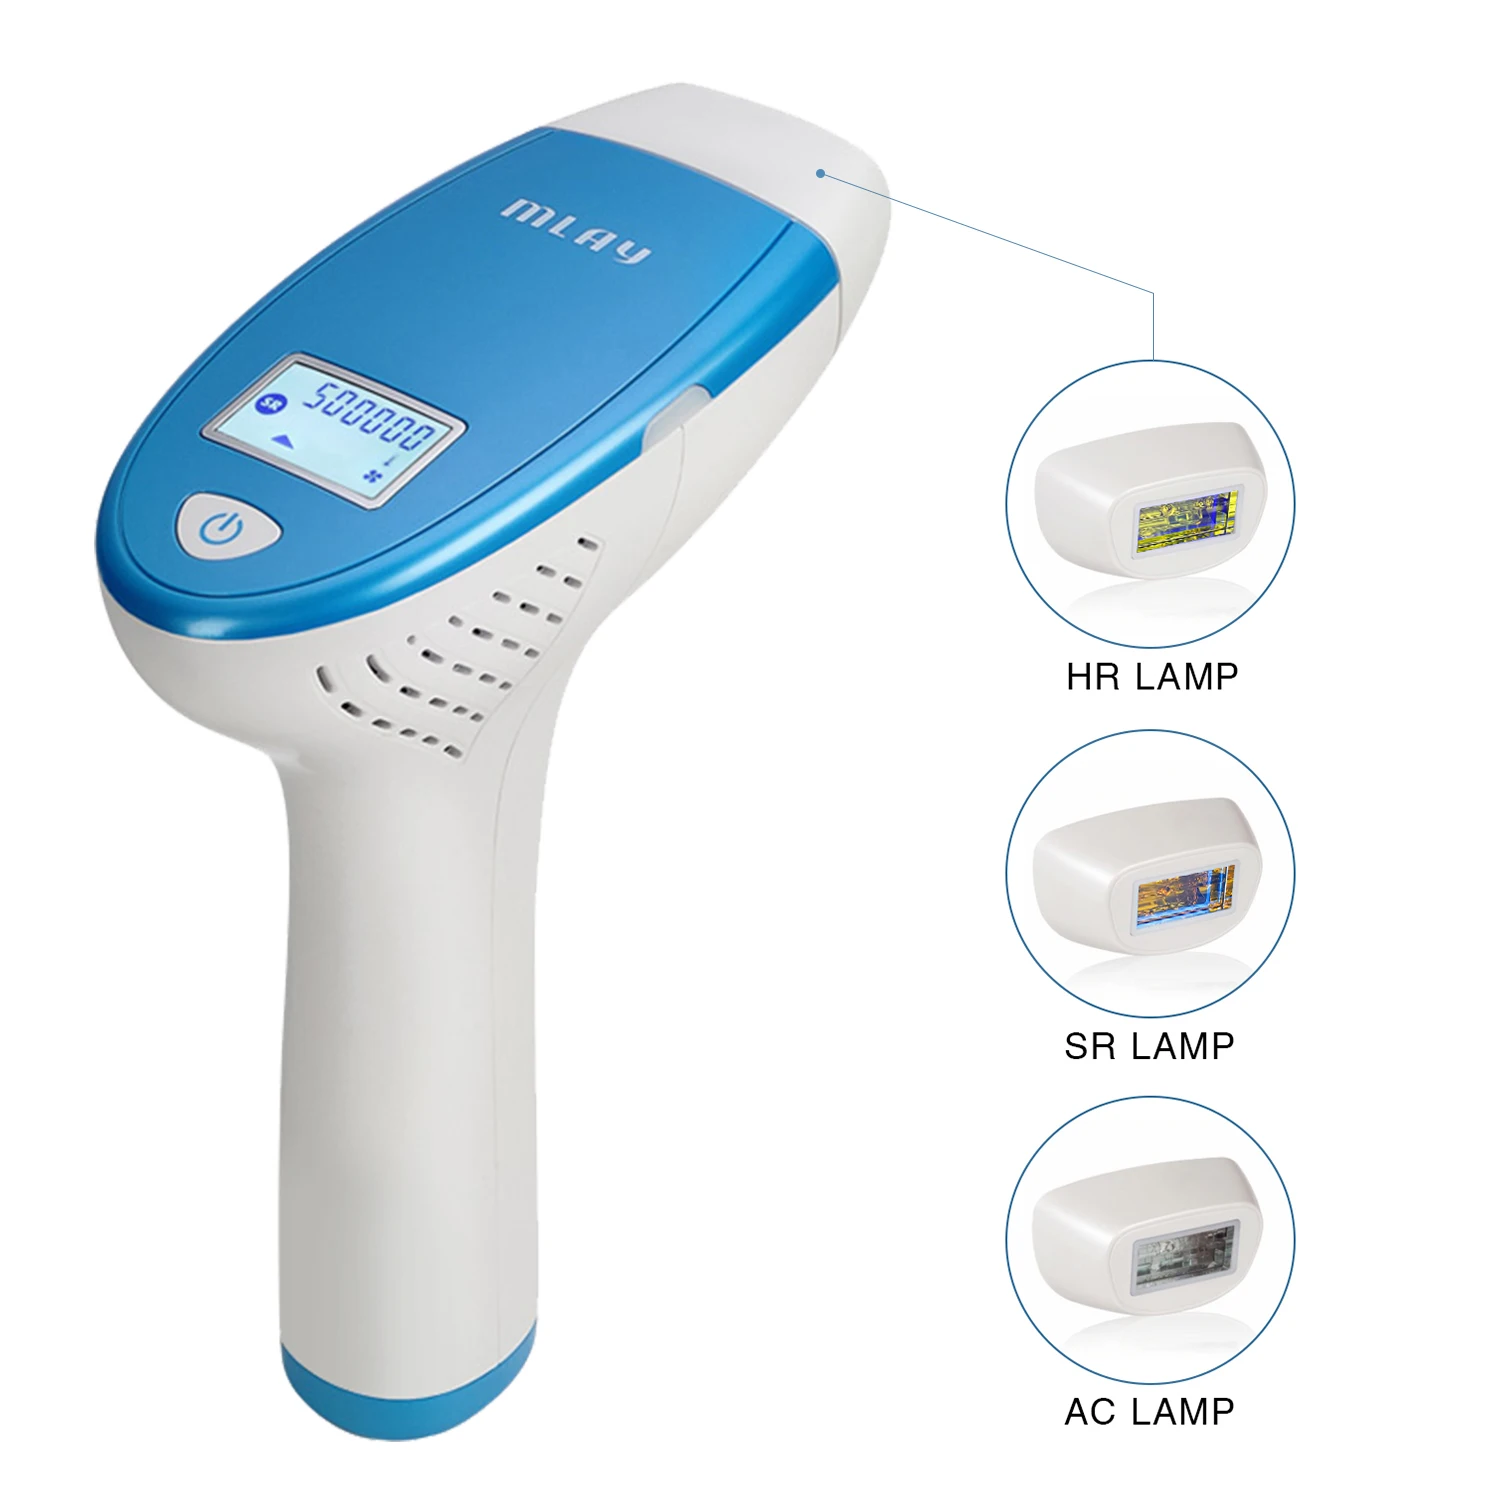 Mlay Portable Handheld Epilator Permanent Hair Removal Device with Pulsed Light Electric UK Plug Power Supply for Home Use